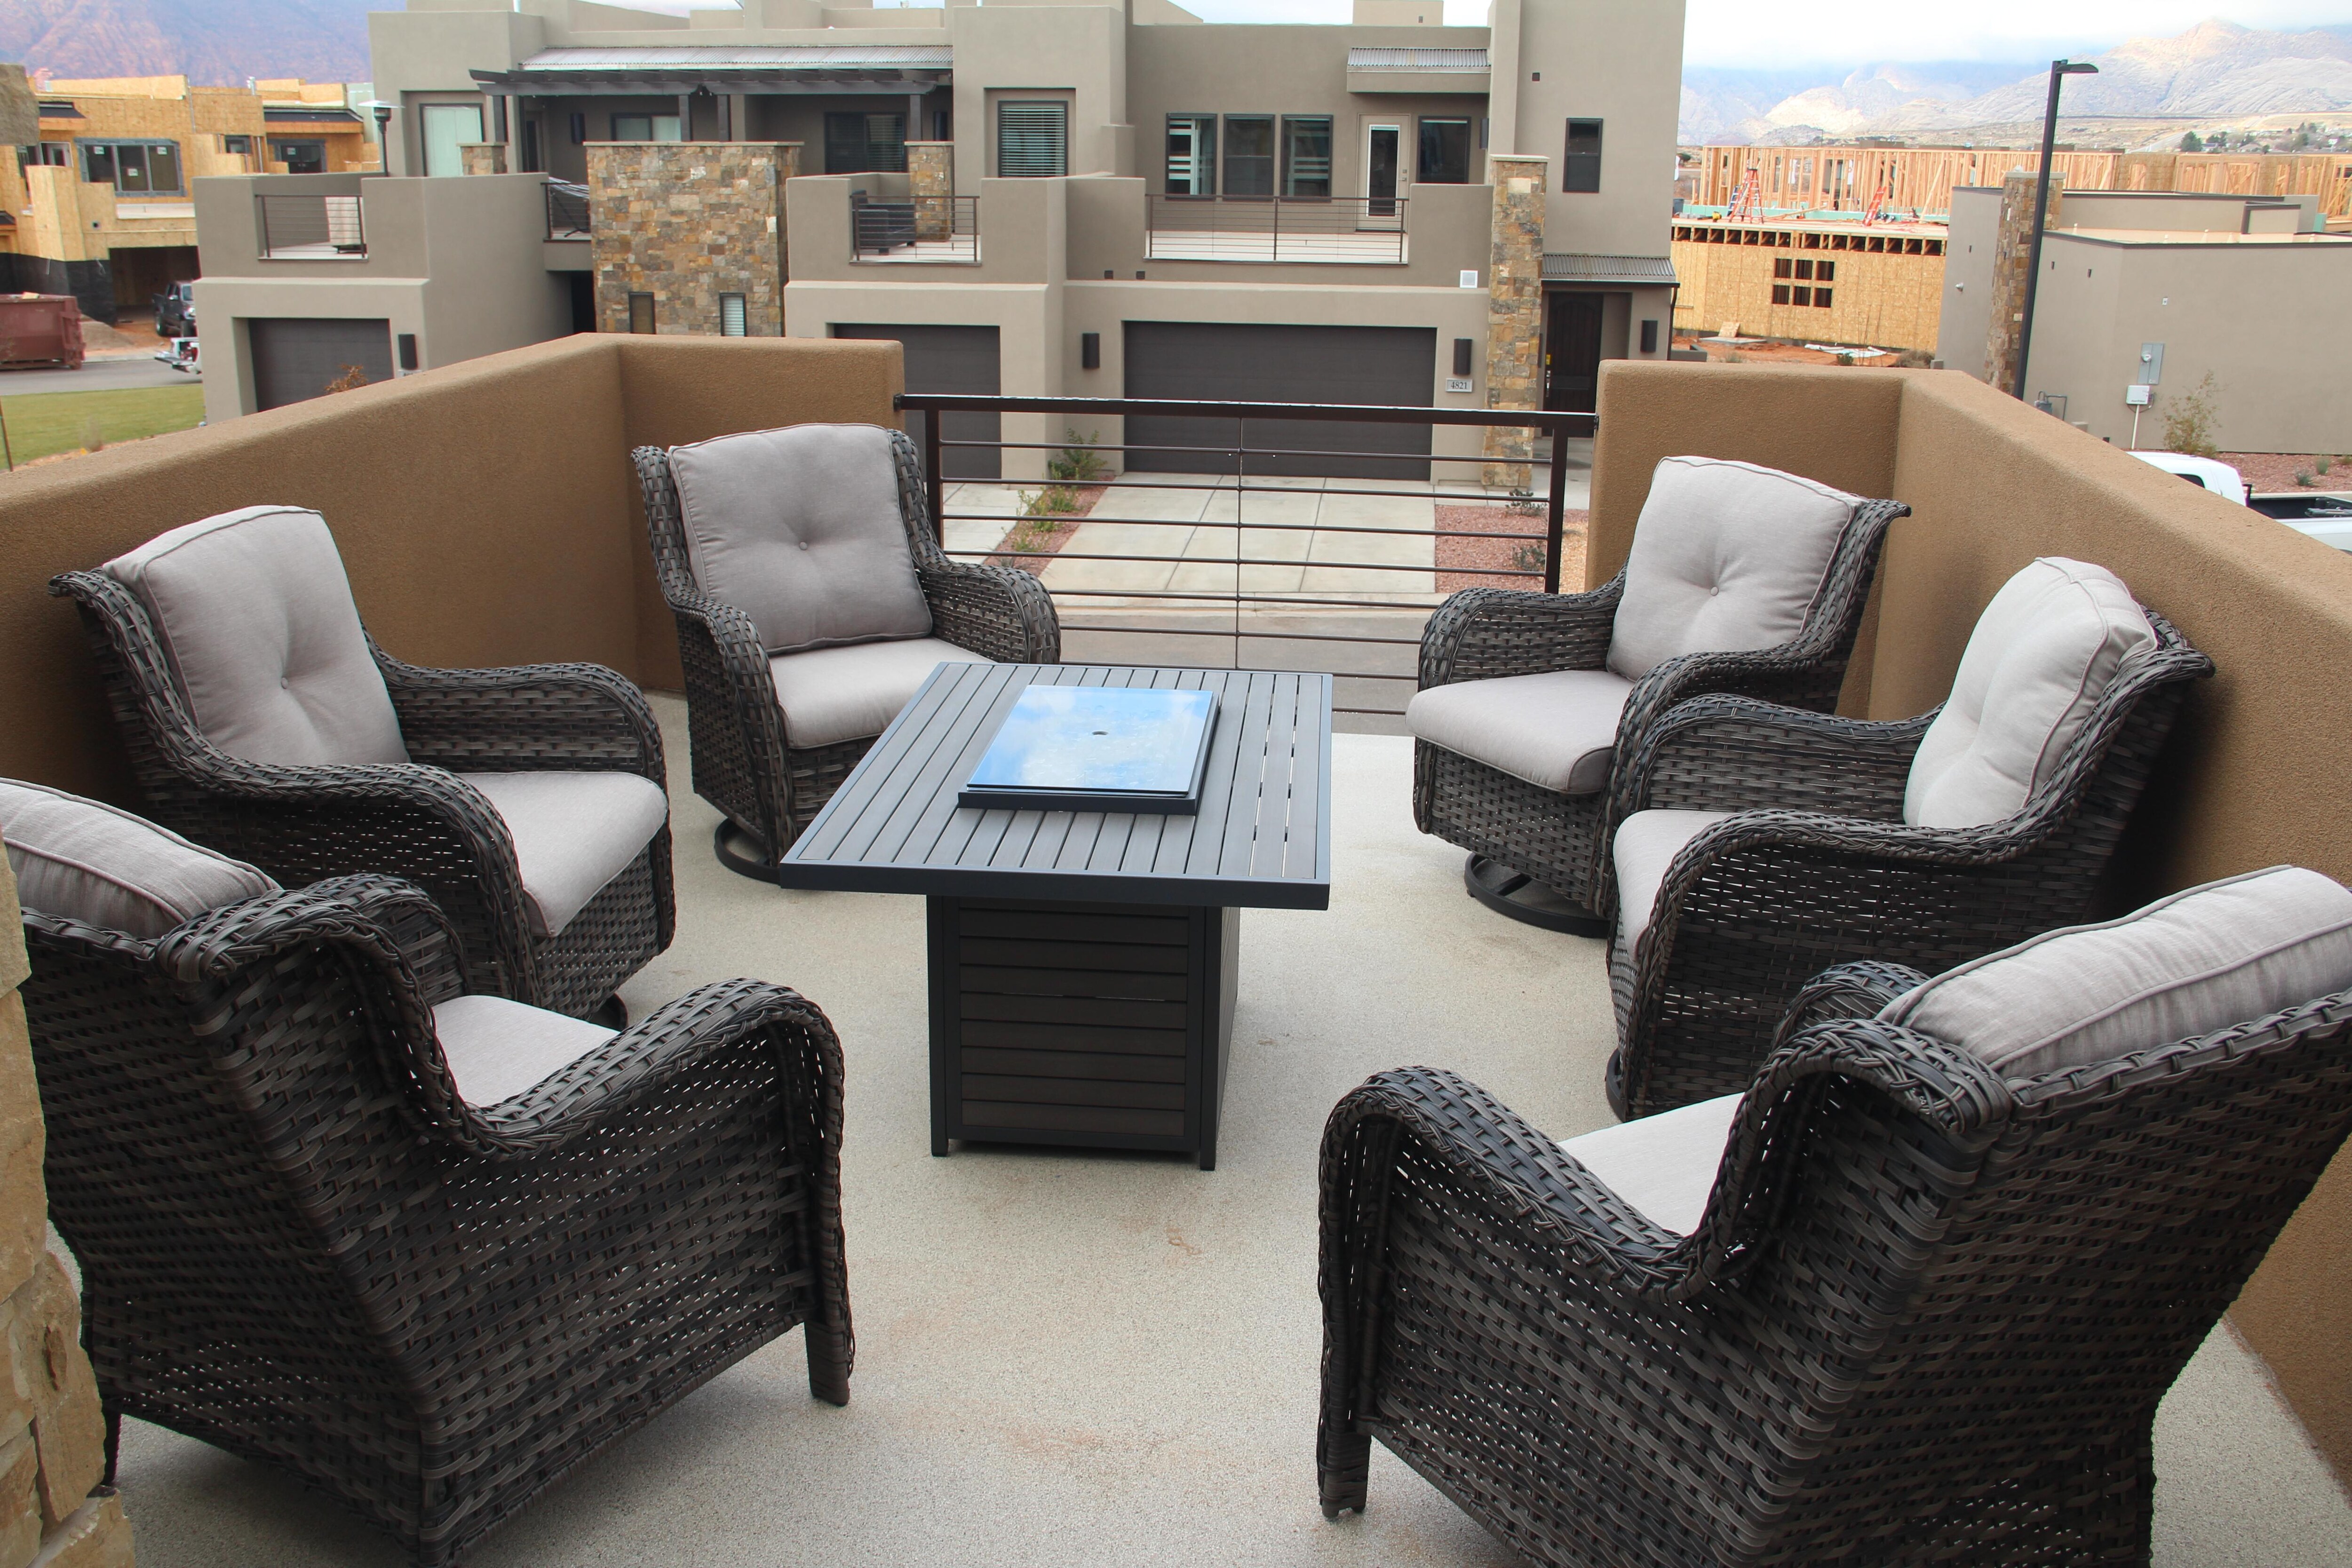 The Front Patio can comfortably accommodate all of your guests and is the perfect place to relax while enjoying a beautiful sunset.